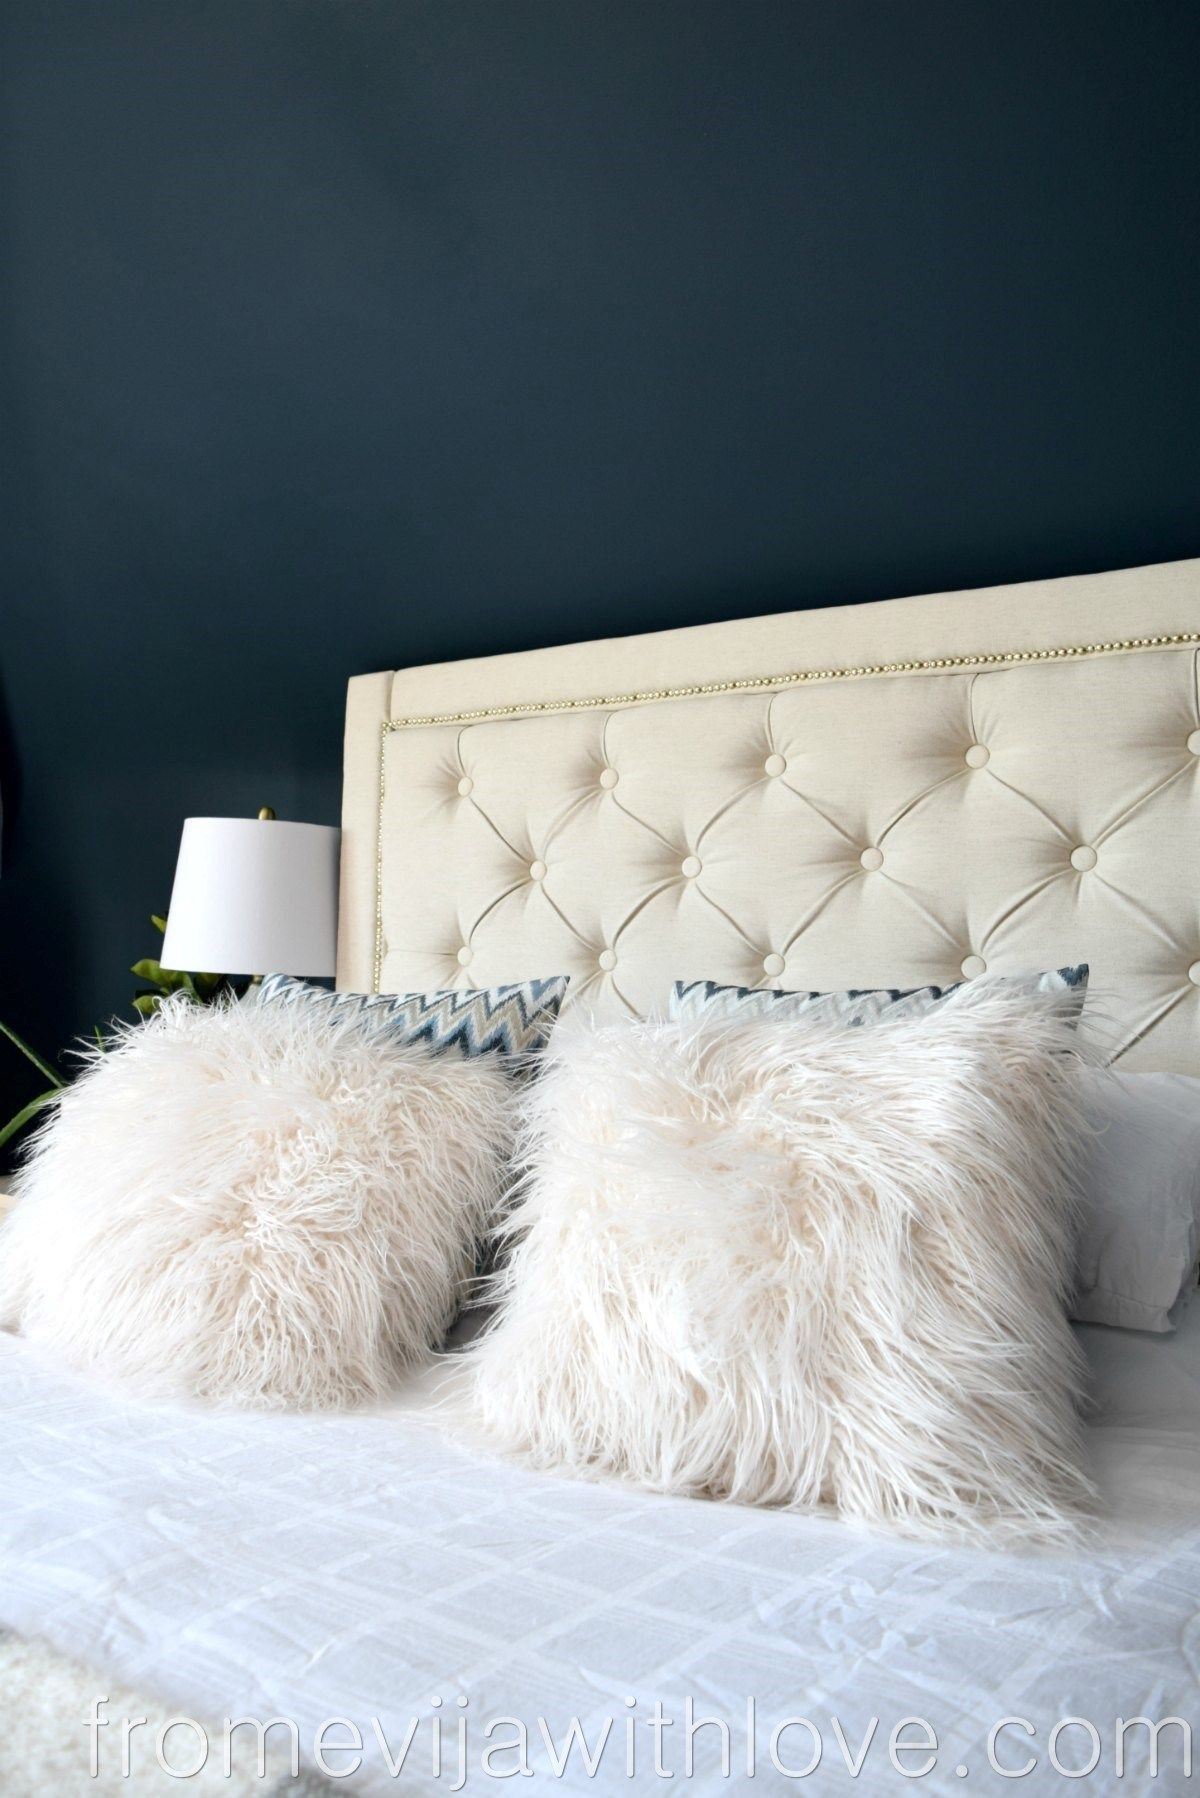 21 diy projects For Bedroom tufted headboards
 ideas